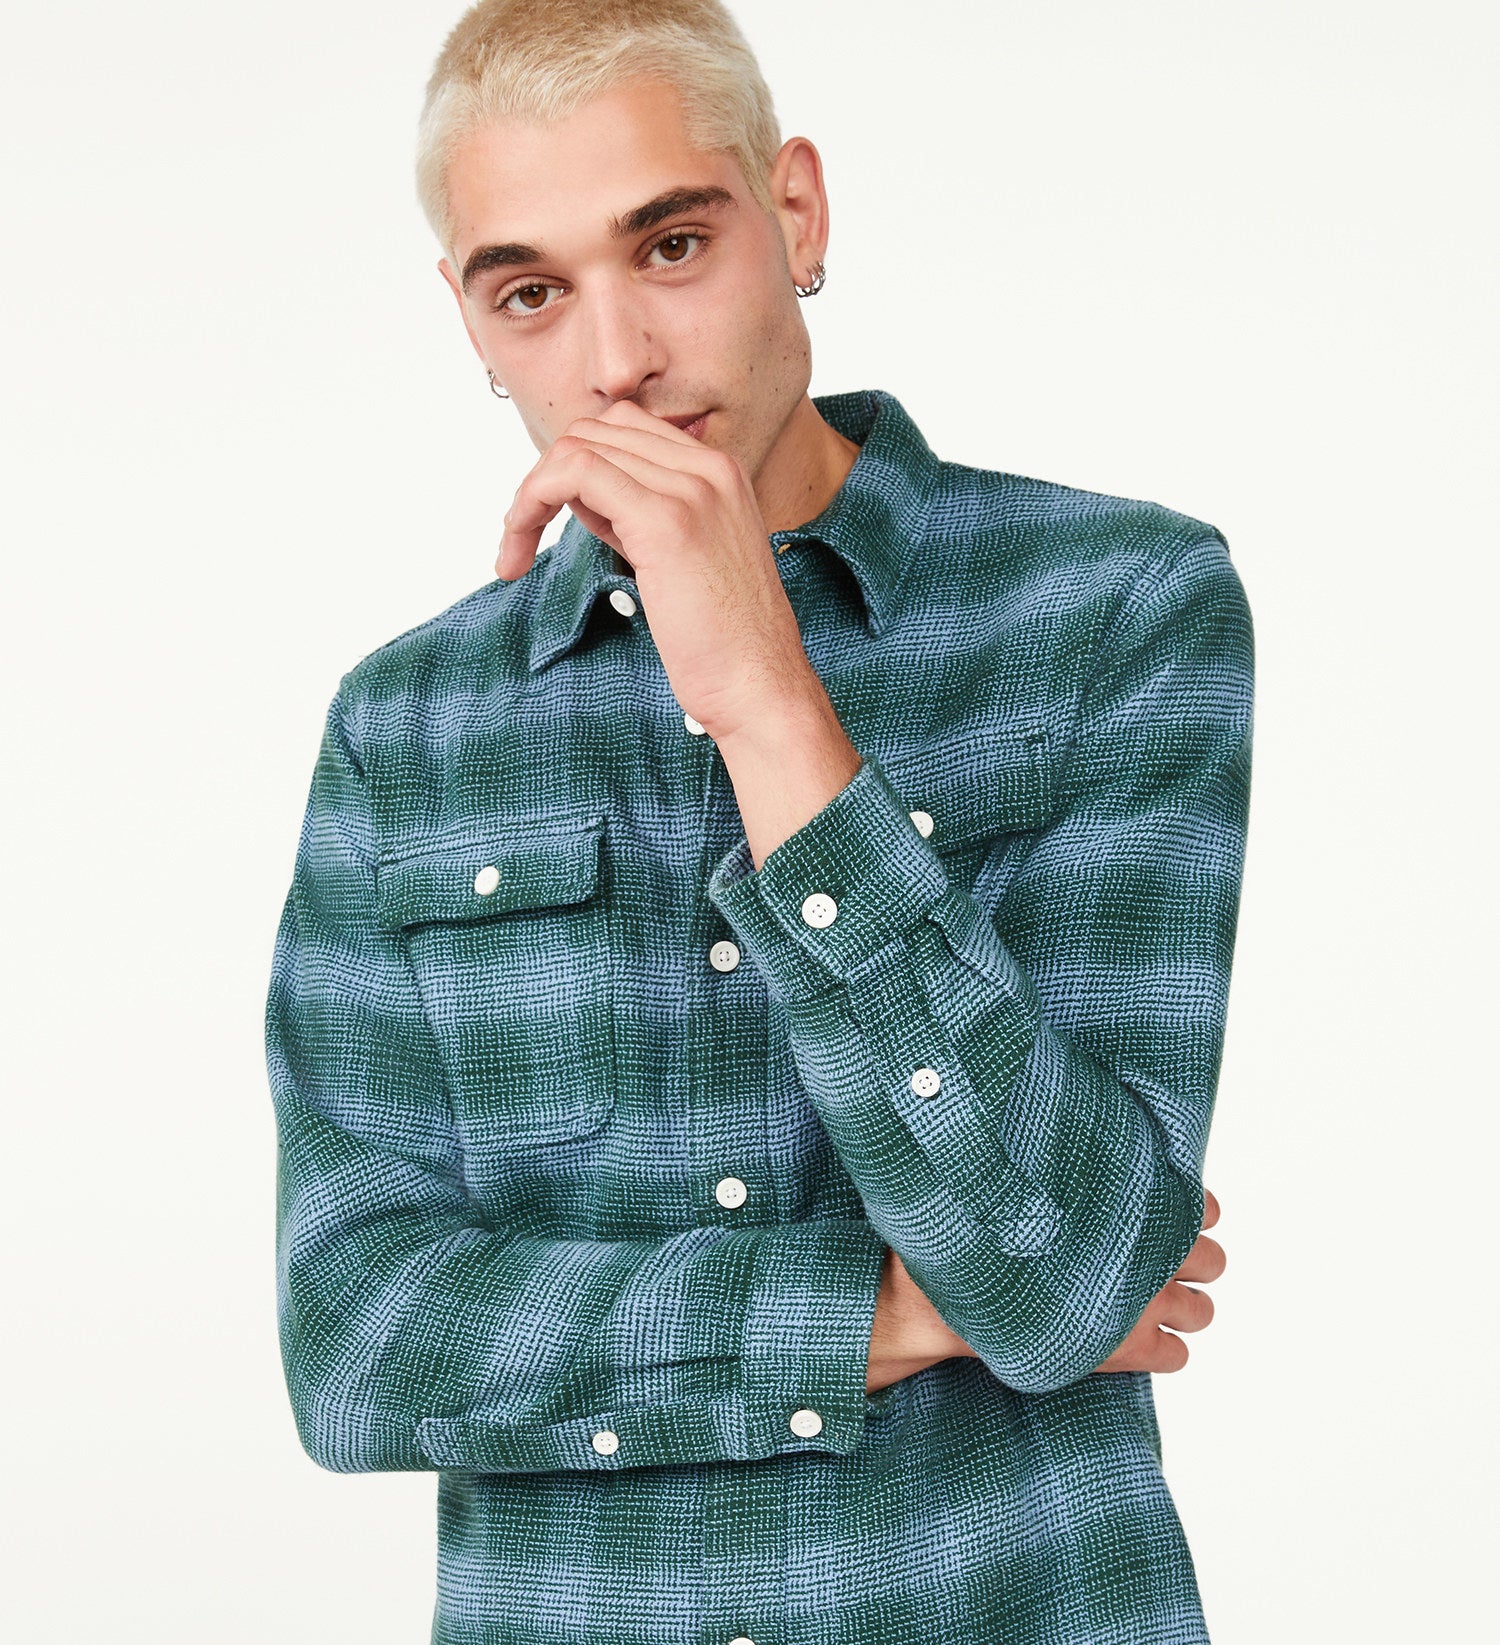 model wearing long-sleeve button down flannel in grey/blue plaid